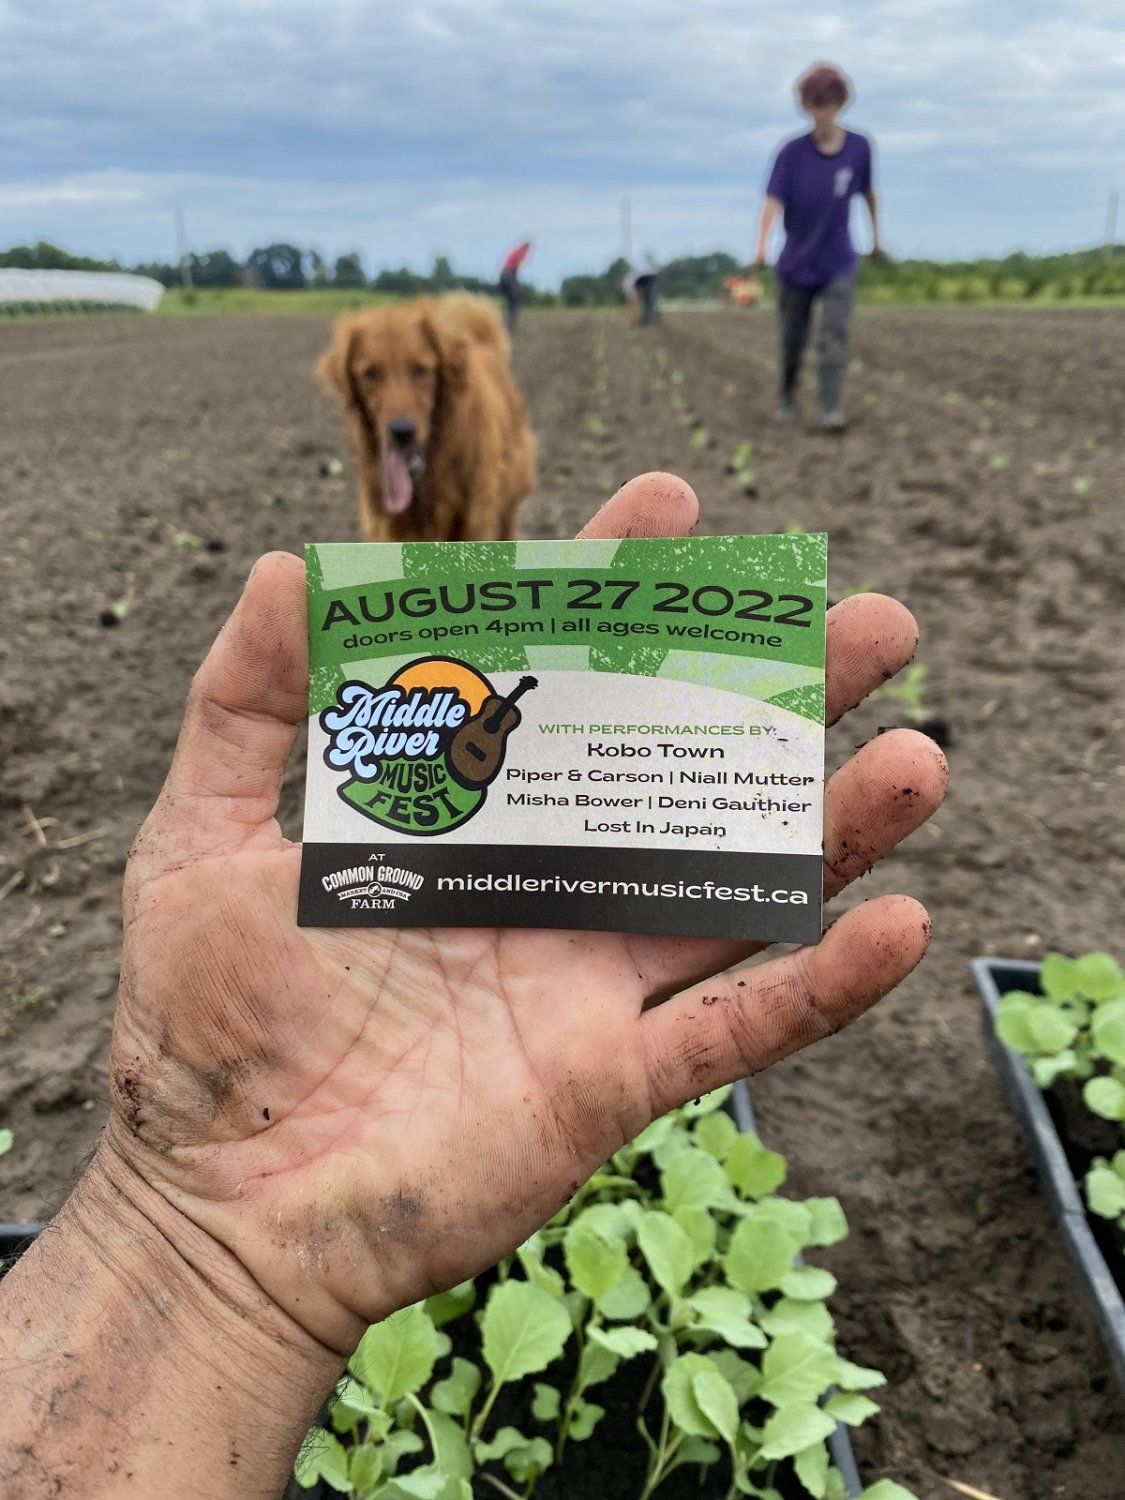 Previous Happening: Farm Happenings for August 11, 2022